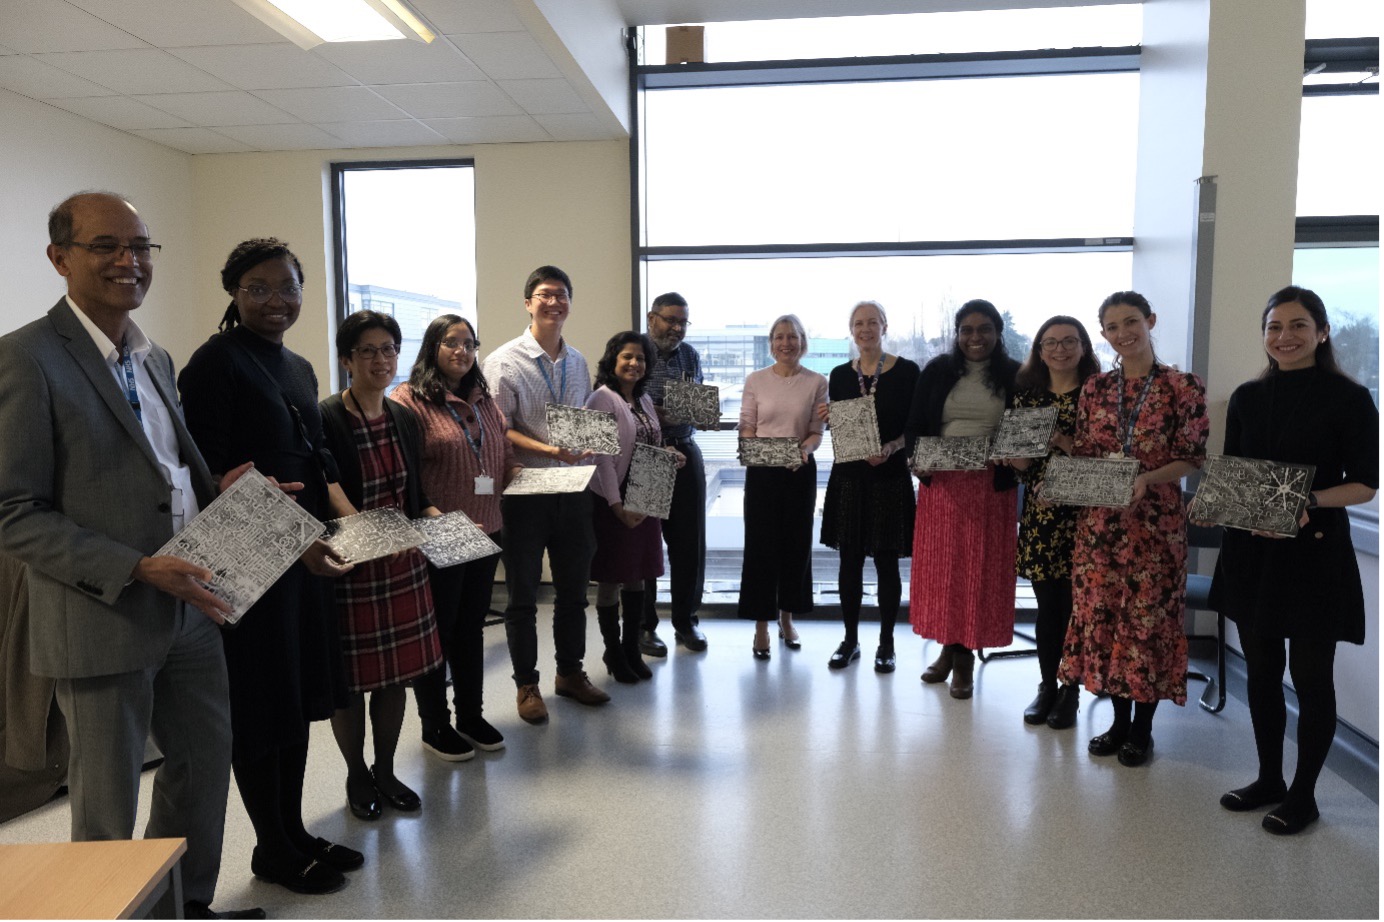 Group photo of participants in Colouring Adult Eczema workshop